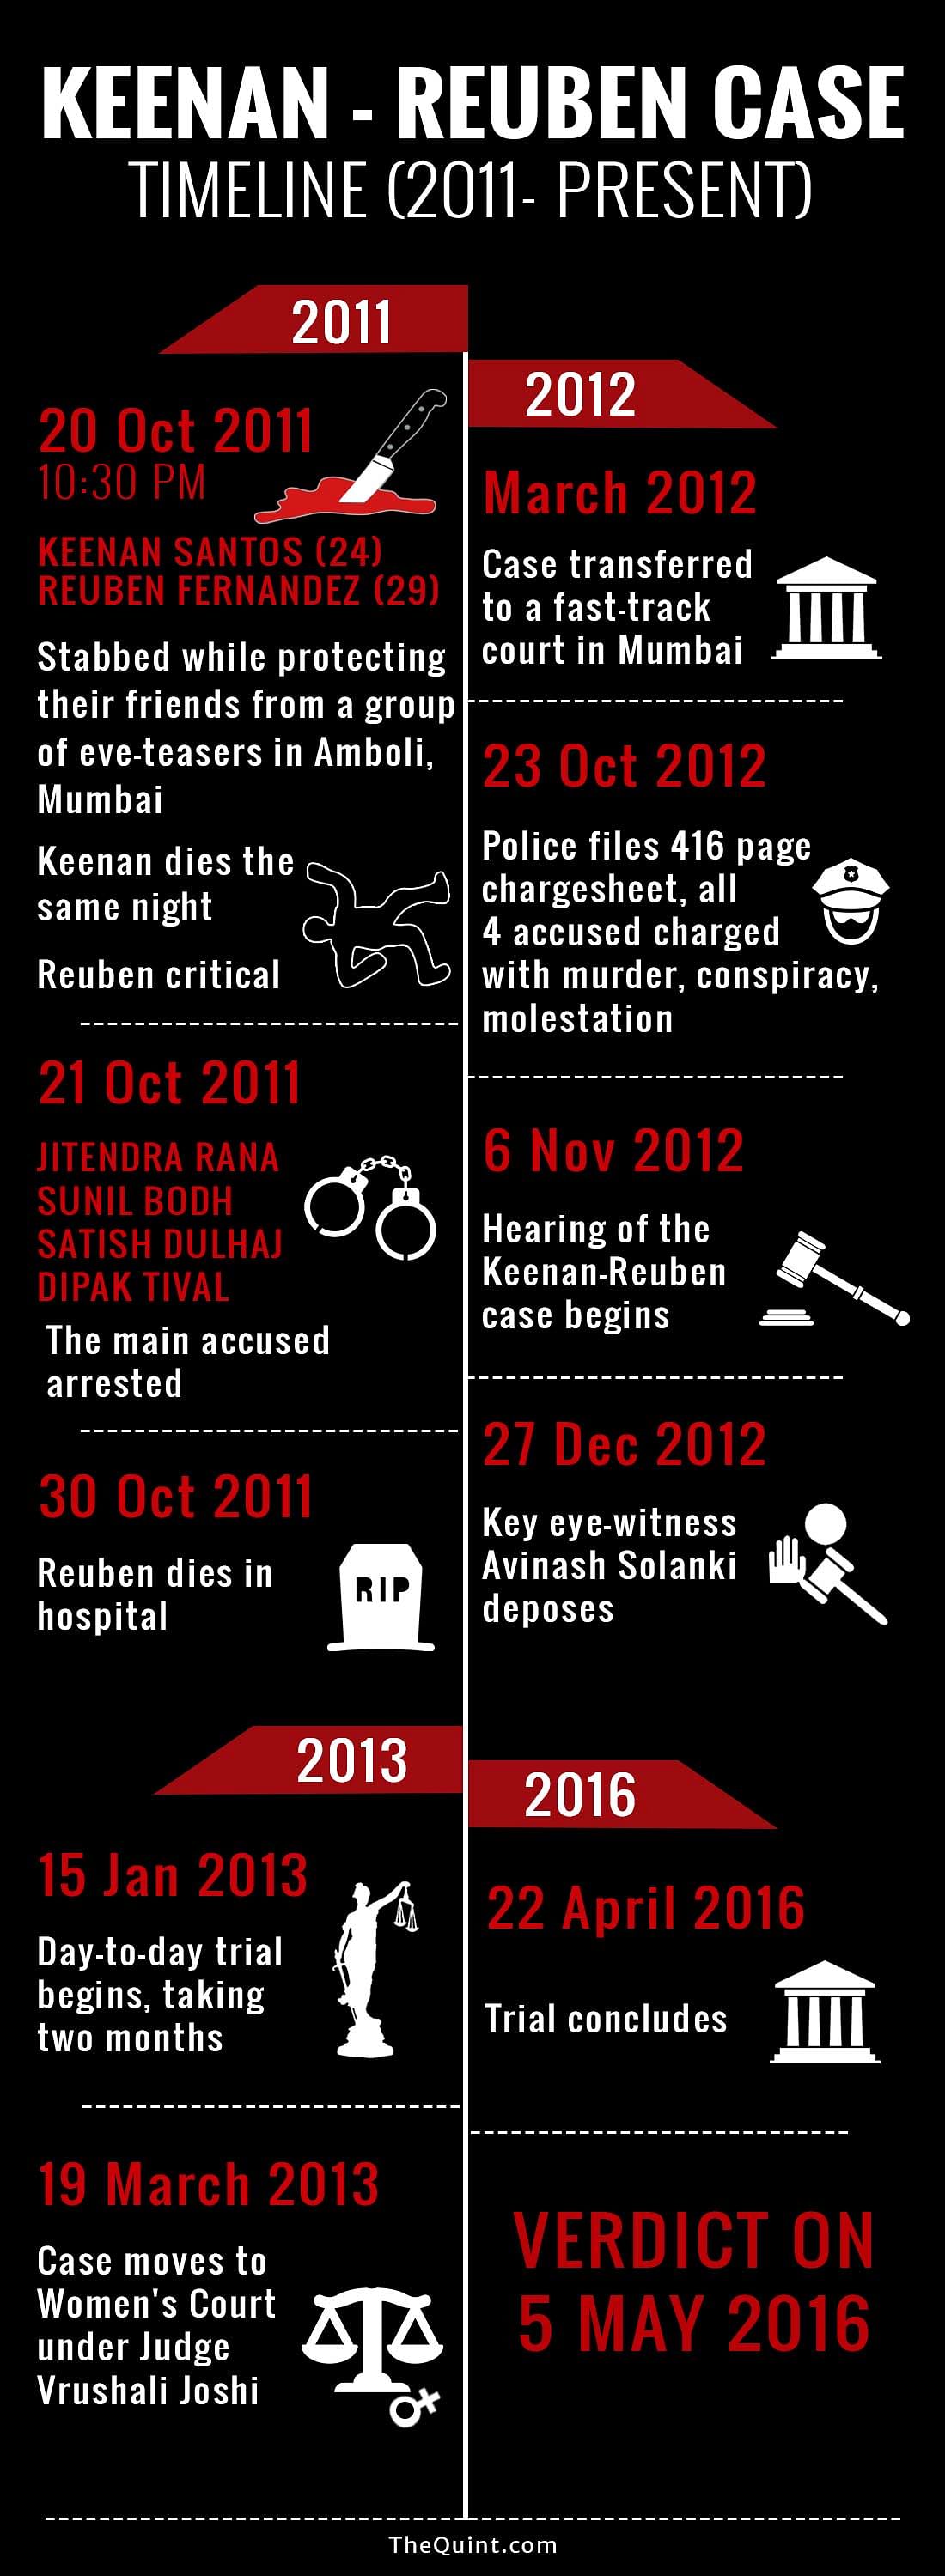 Five years after the open-and-shut murder case of Keenan and Reuben, the verdict will be announced on 5 May 2016.